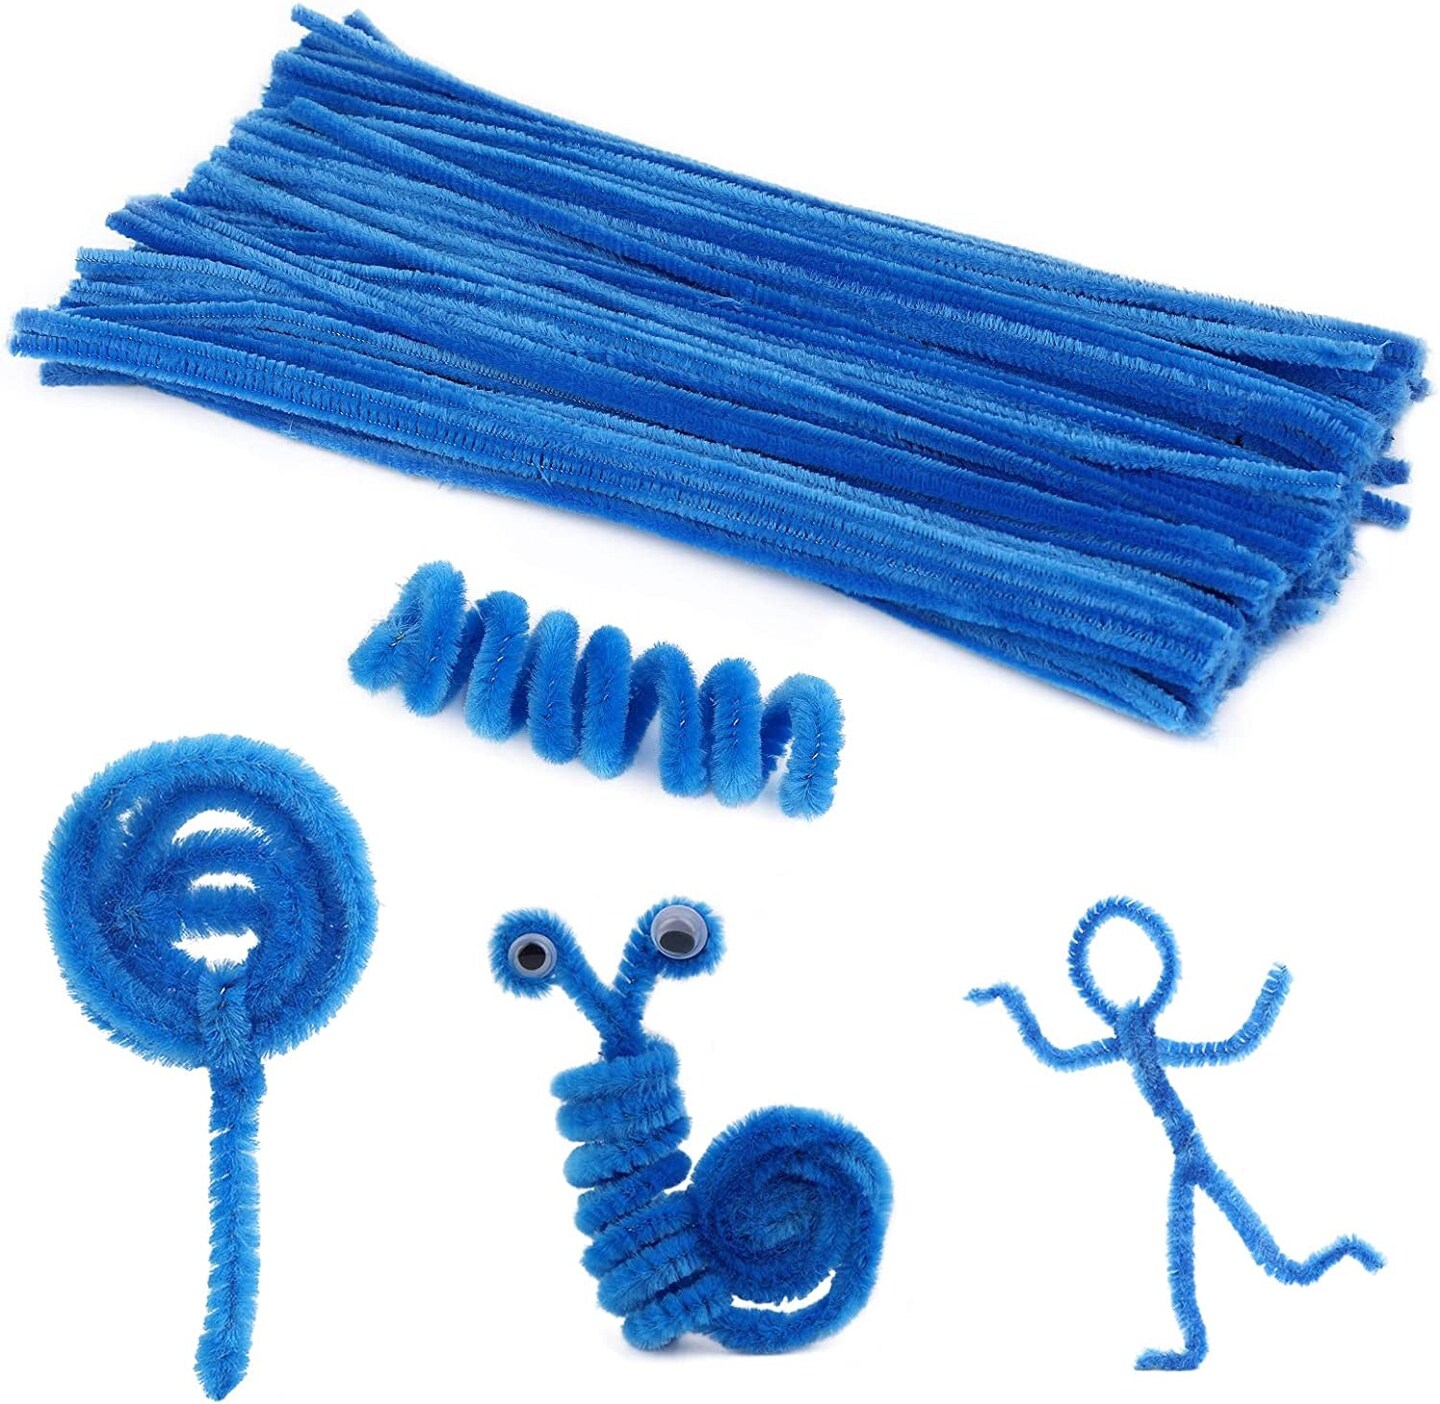 Pipe Cleaners I Chenille Stems